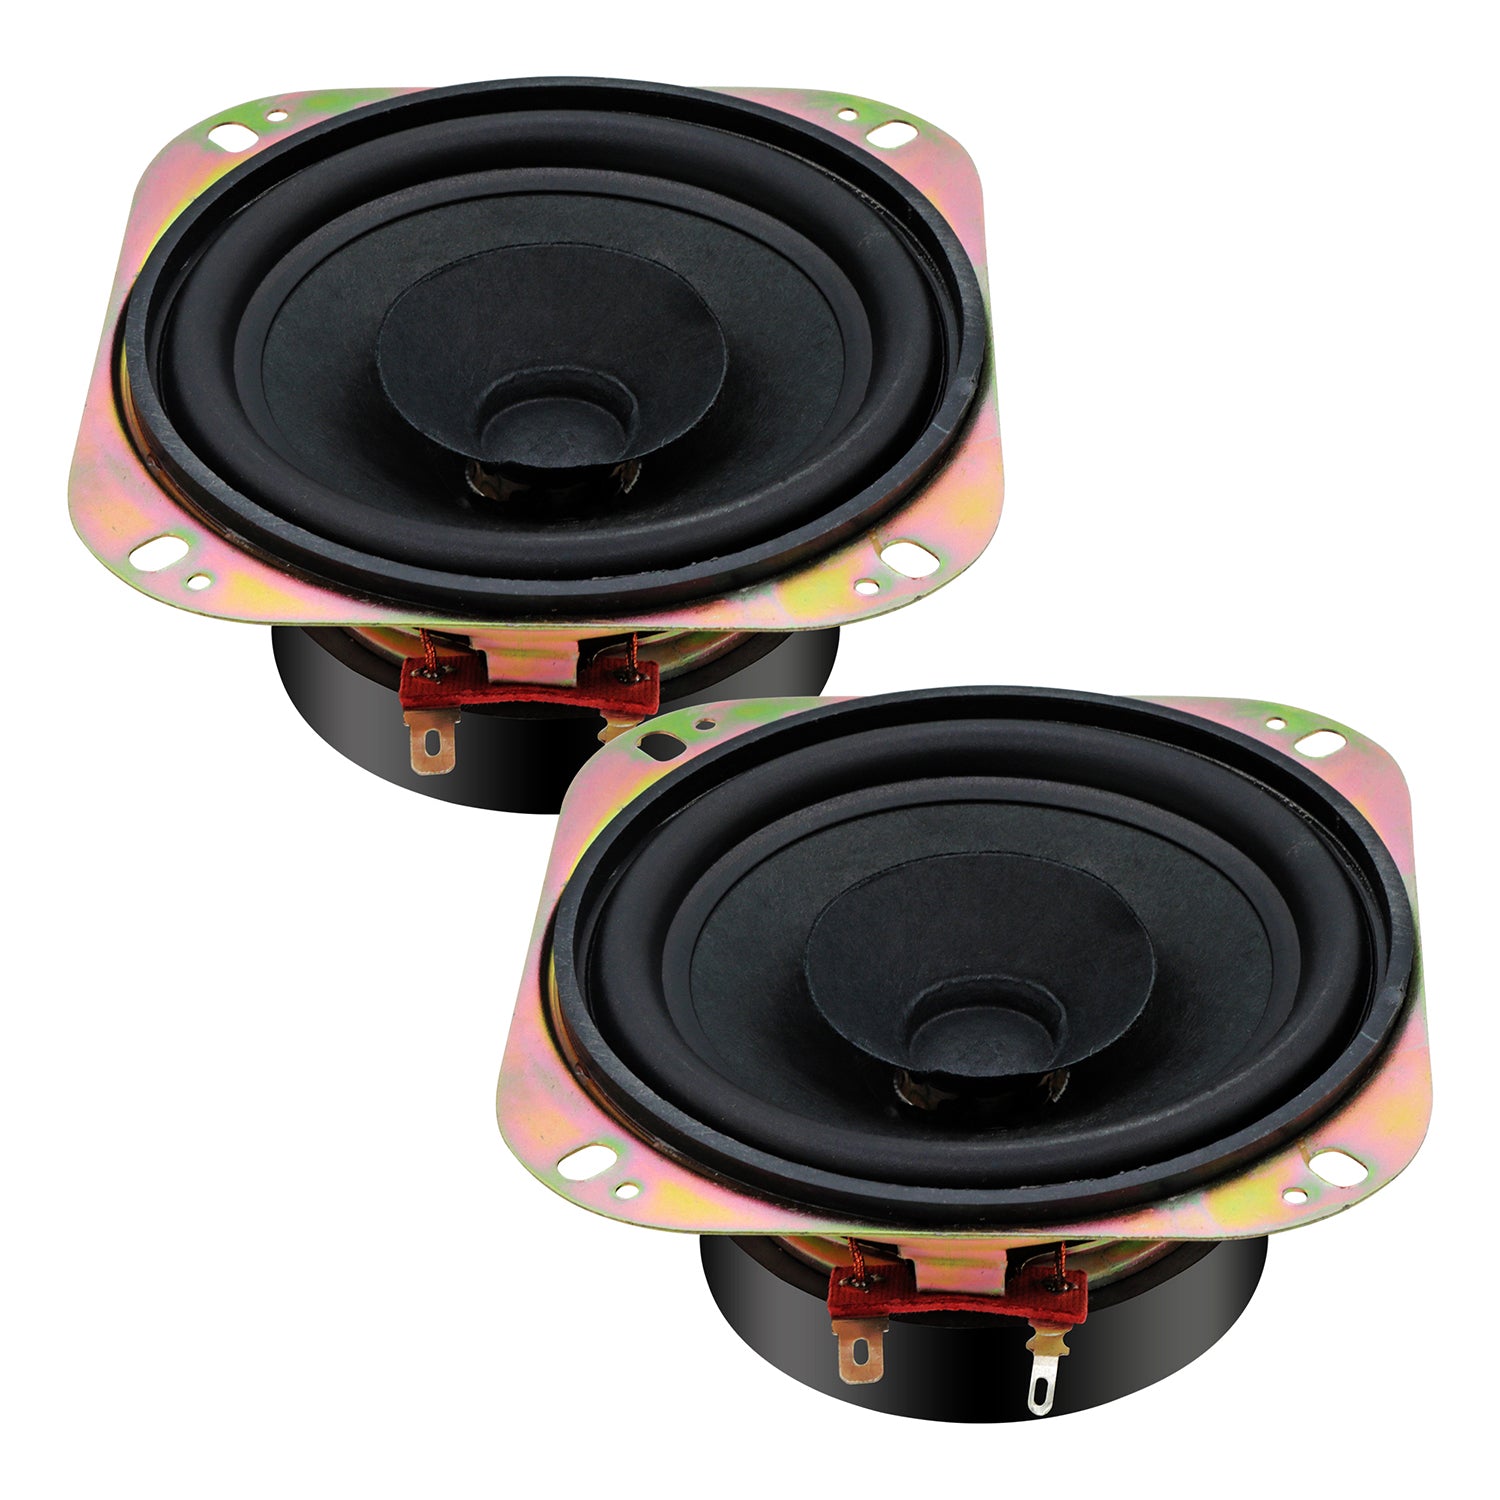 5 Core 4 Inch Subwoofer 200W Peak 4 Ohm Replacement Car Bass Sub Woofer w 0.81" Voice Coil